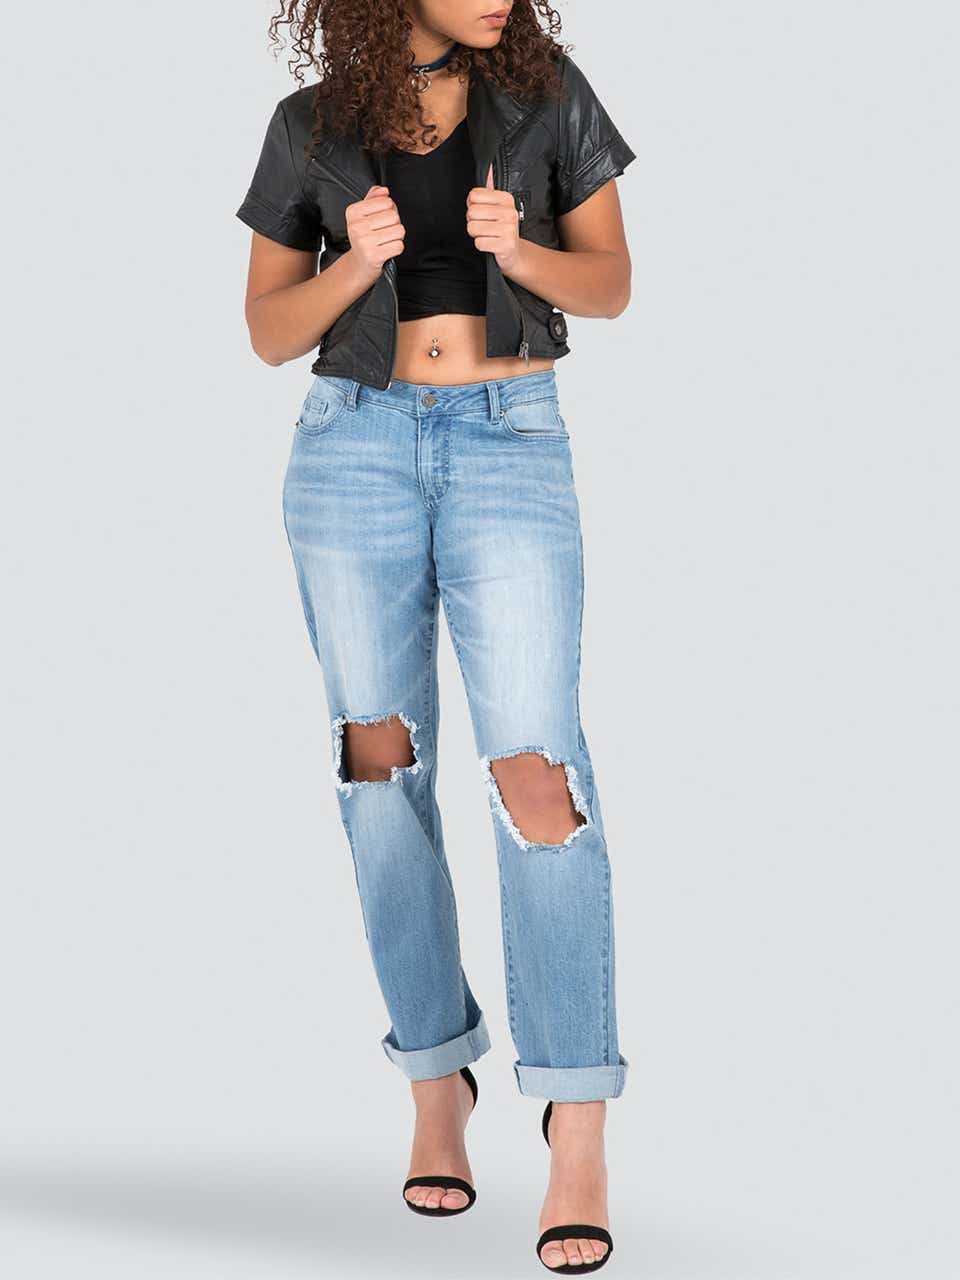 tape Expansion Assimilation Best Boyfriend Jeans for Women; 90s, Ripped, Distressed